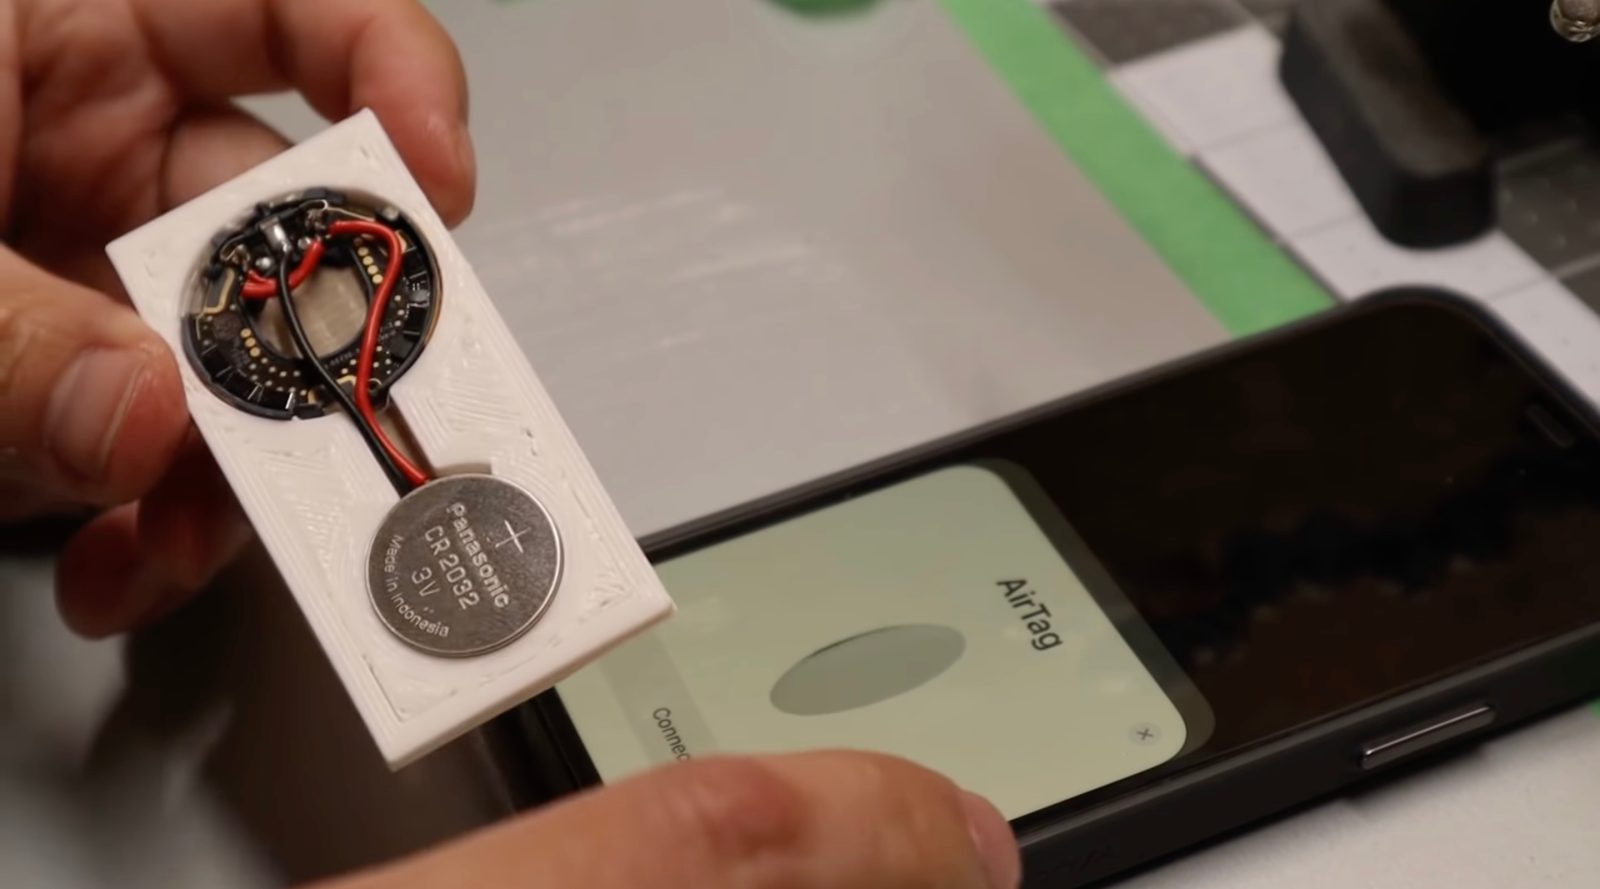 Video: User rebuilds AirTag as a thinner card that fits into